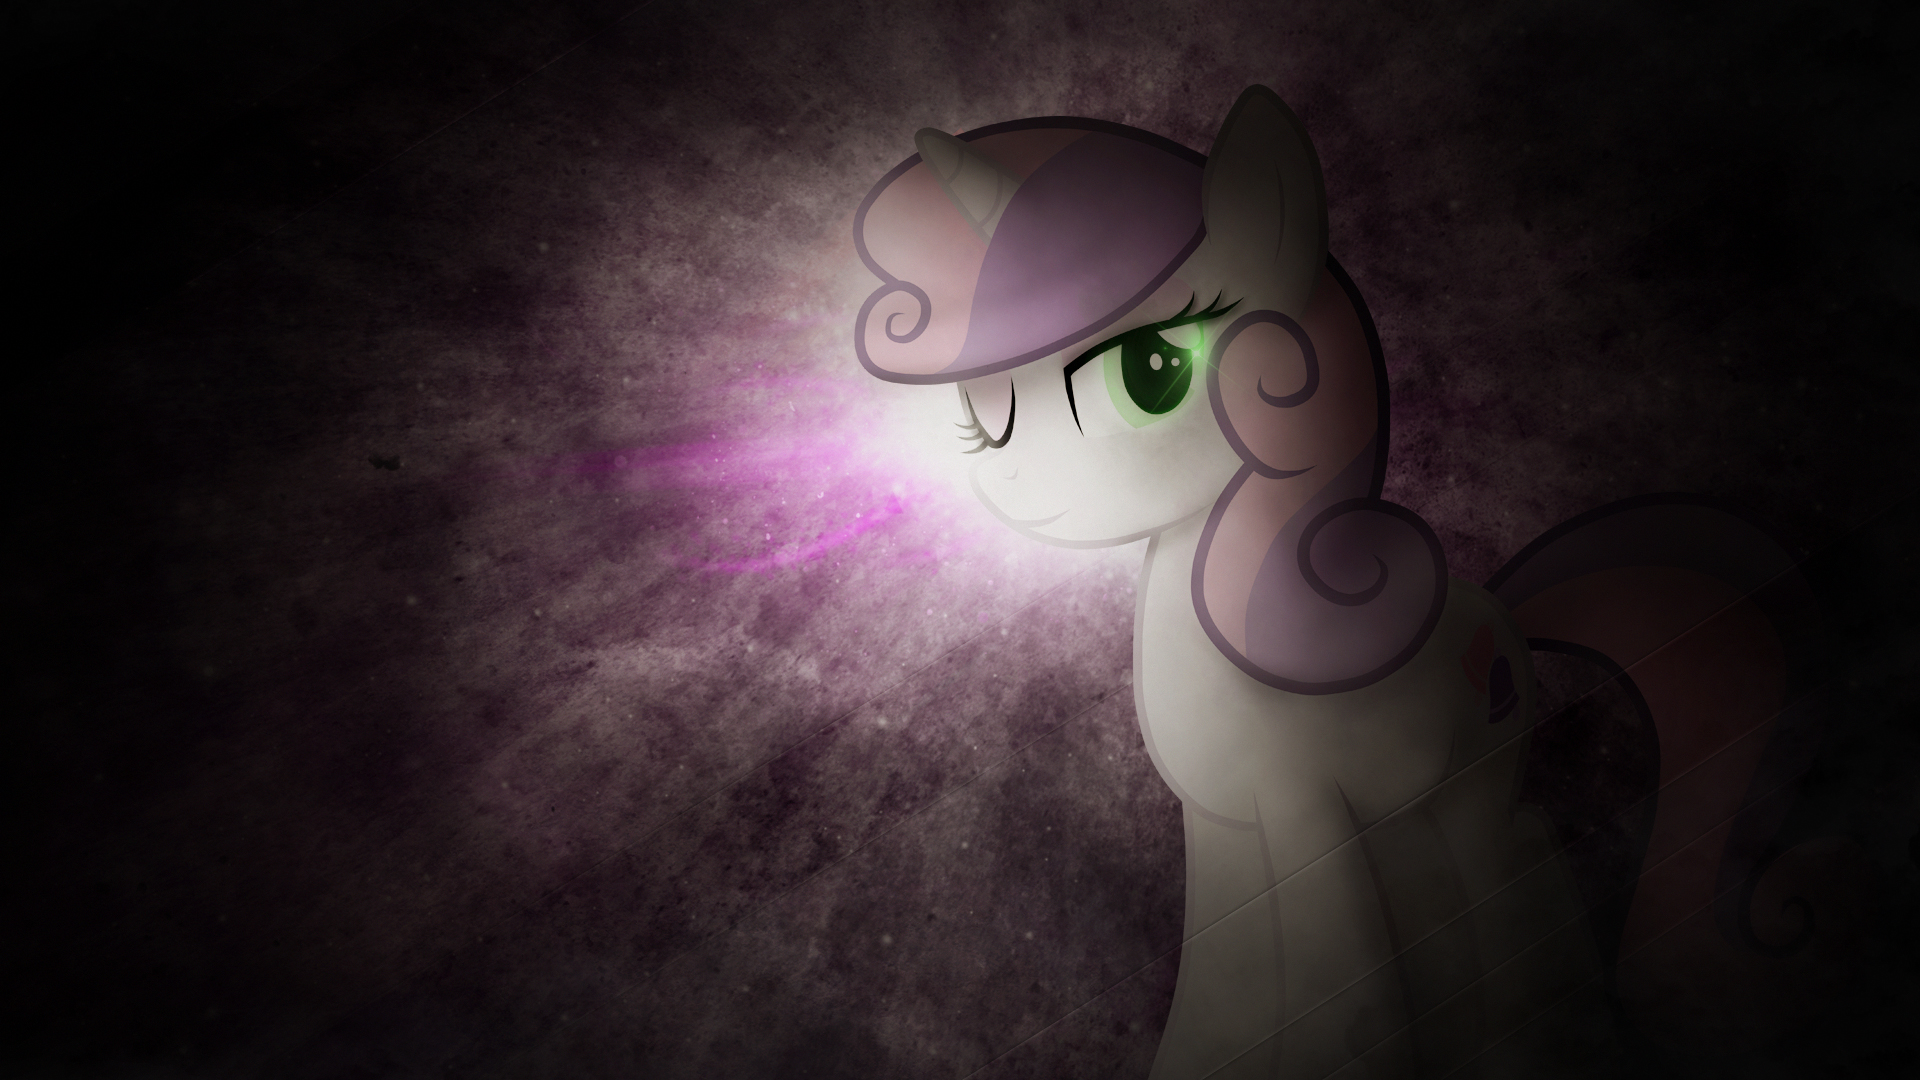 Wallpaper ~ Grown up Sweetie Belle. by JennieOo and Mackaged